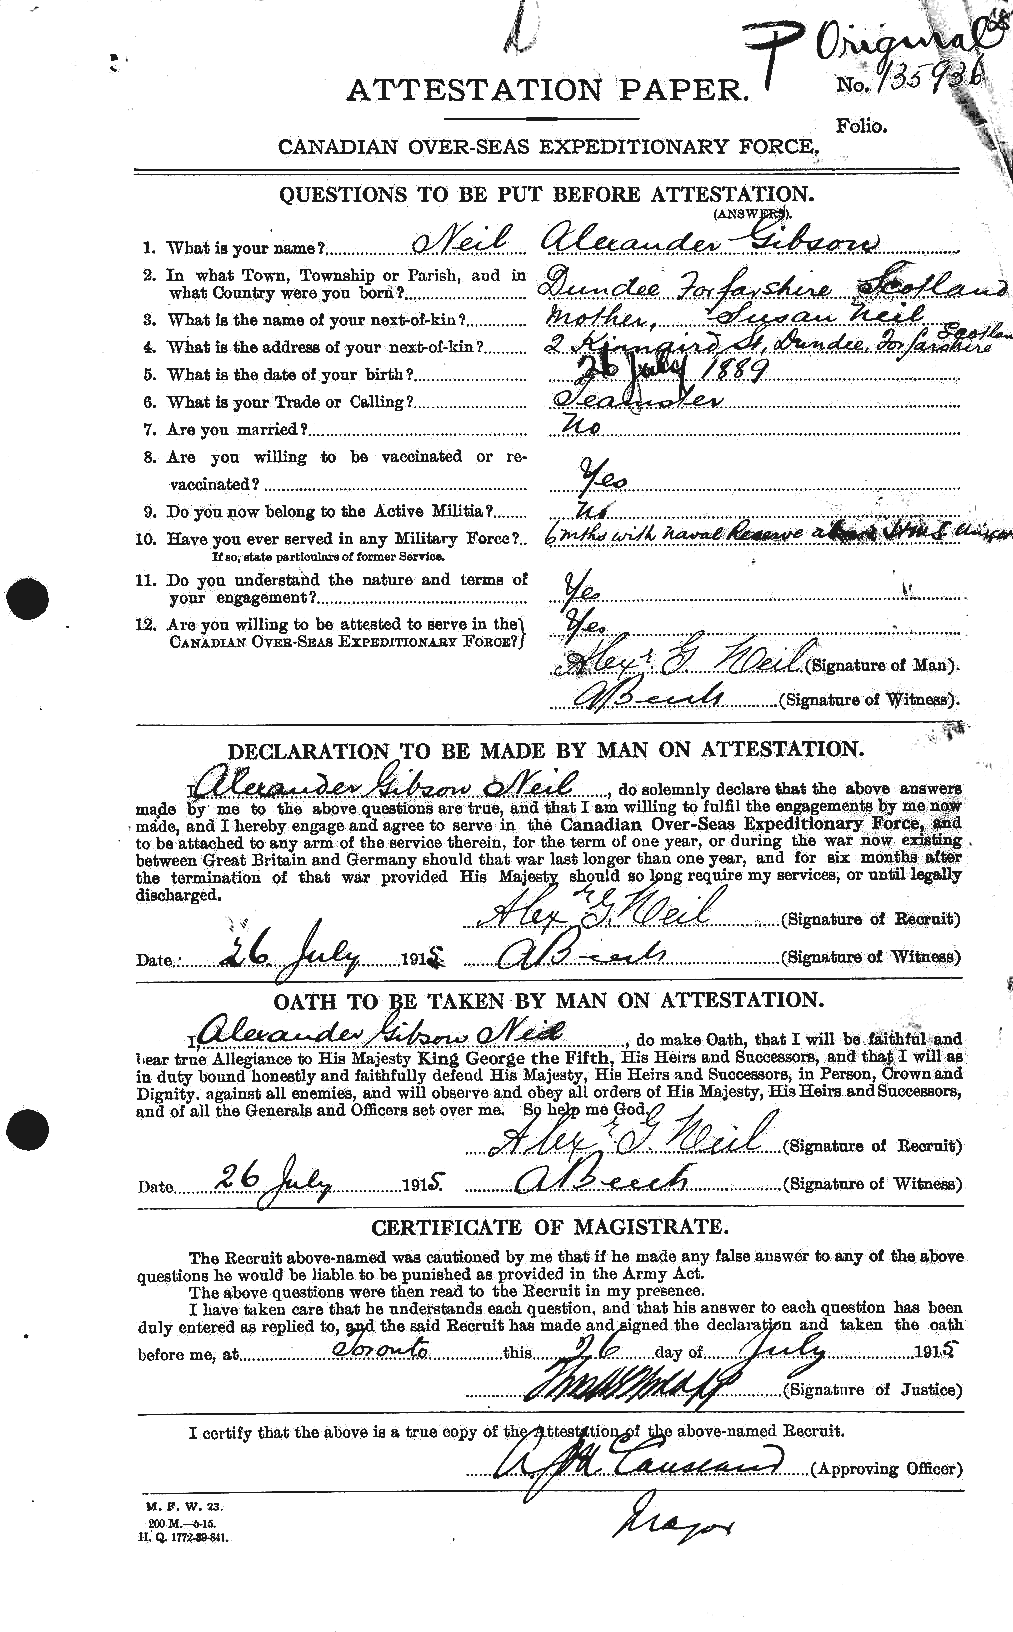 Personnel Records of the First World War - CEF 545547a